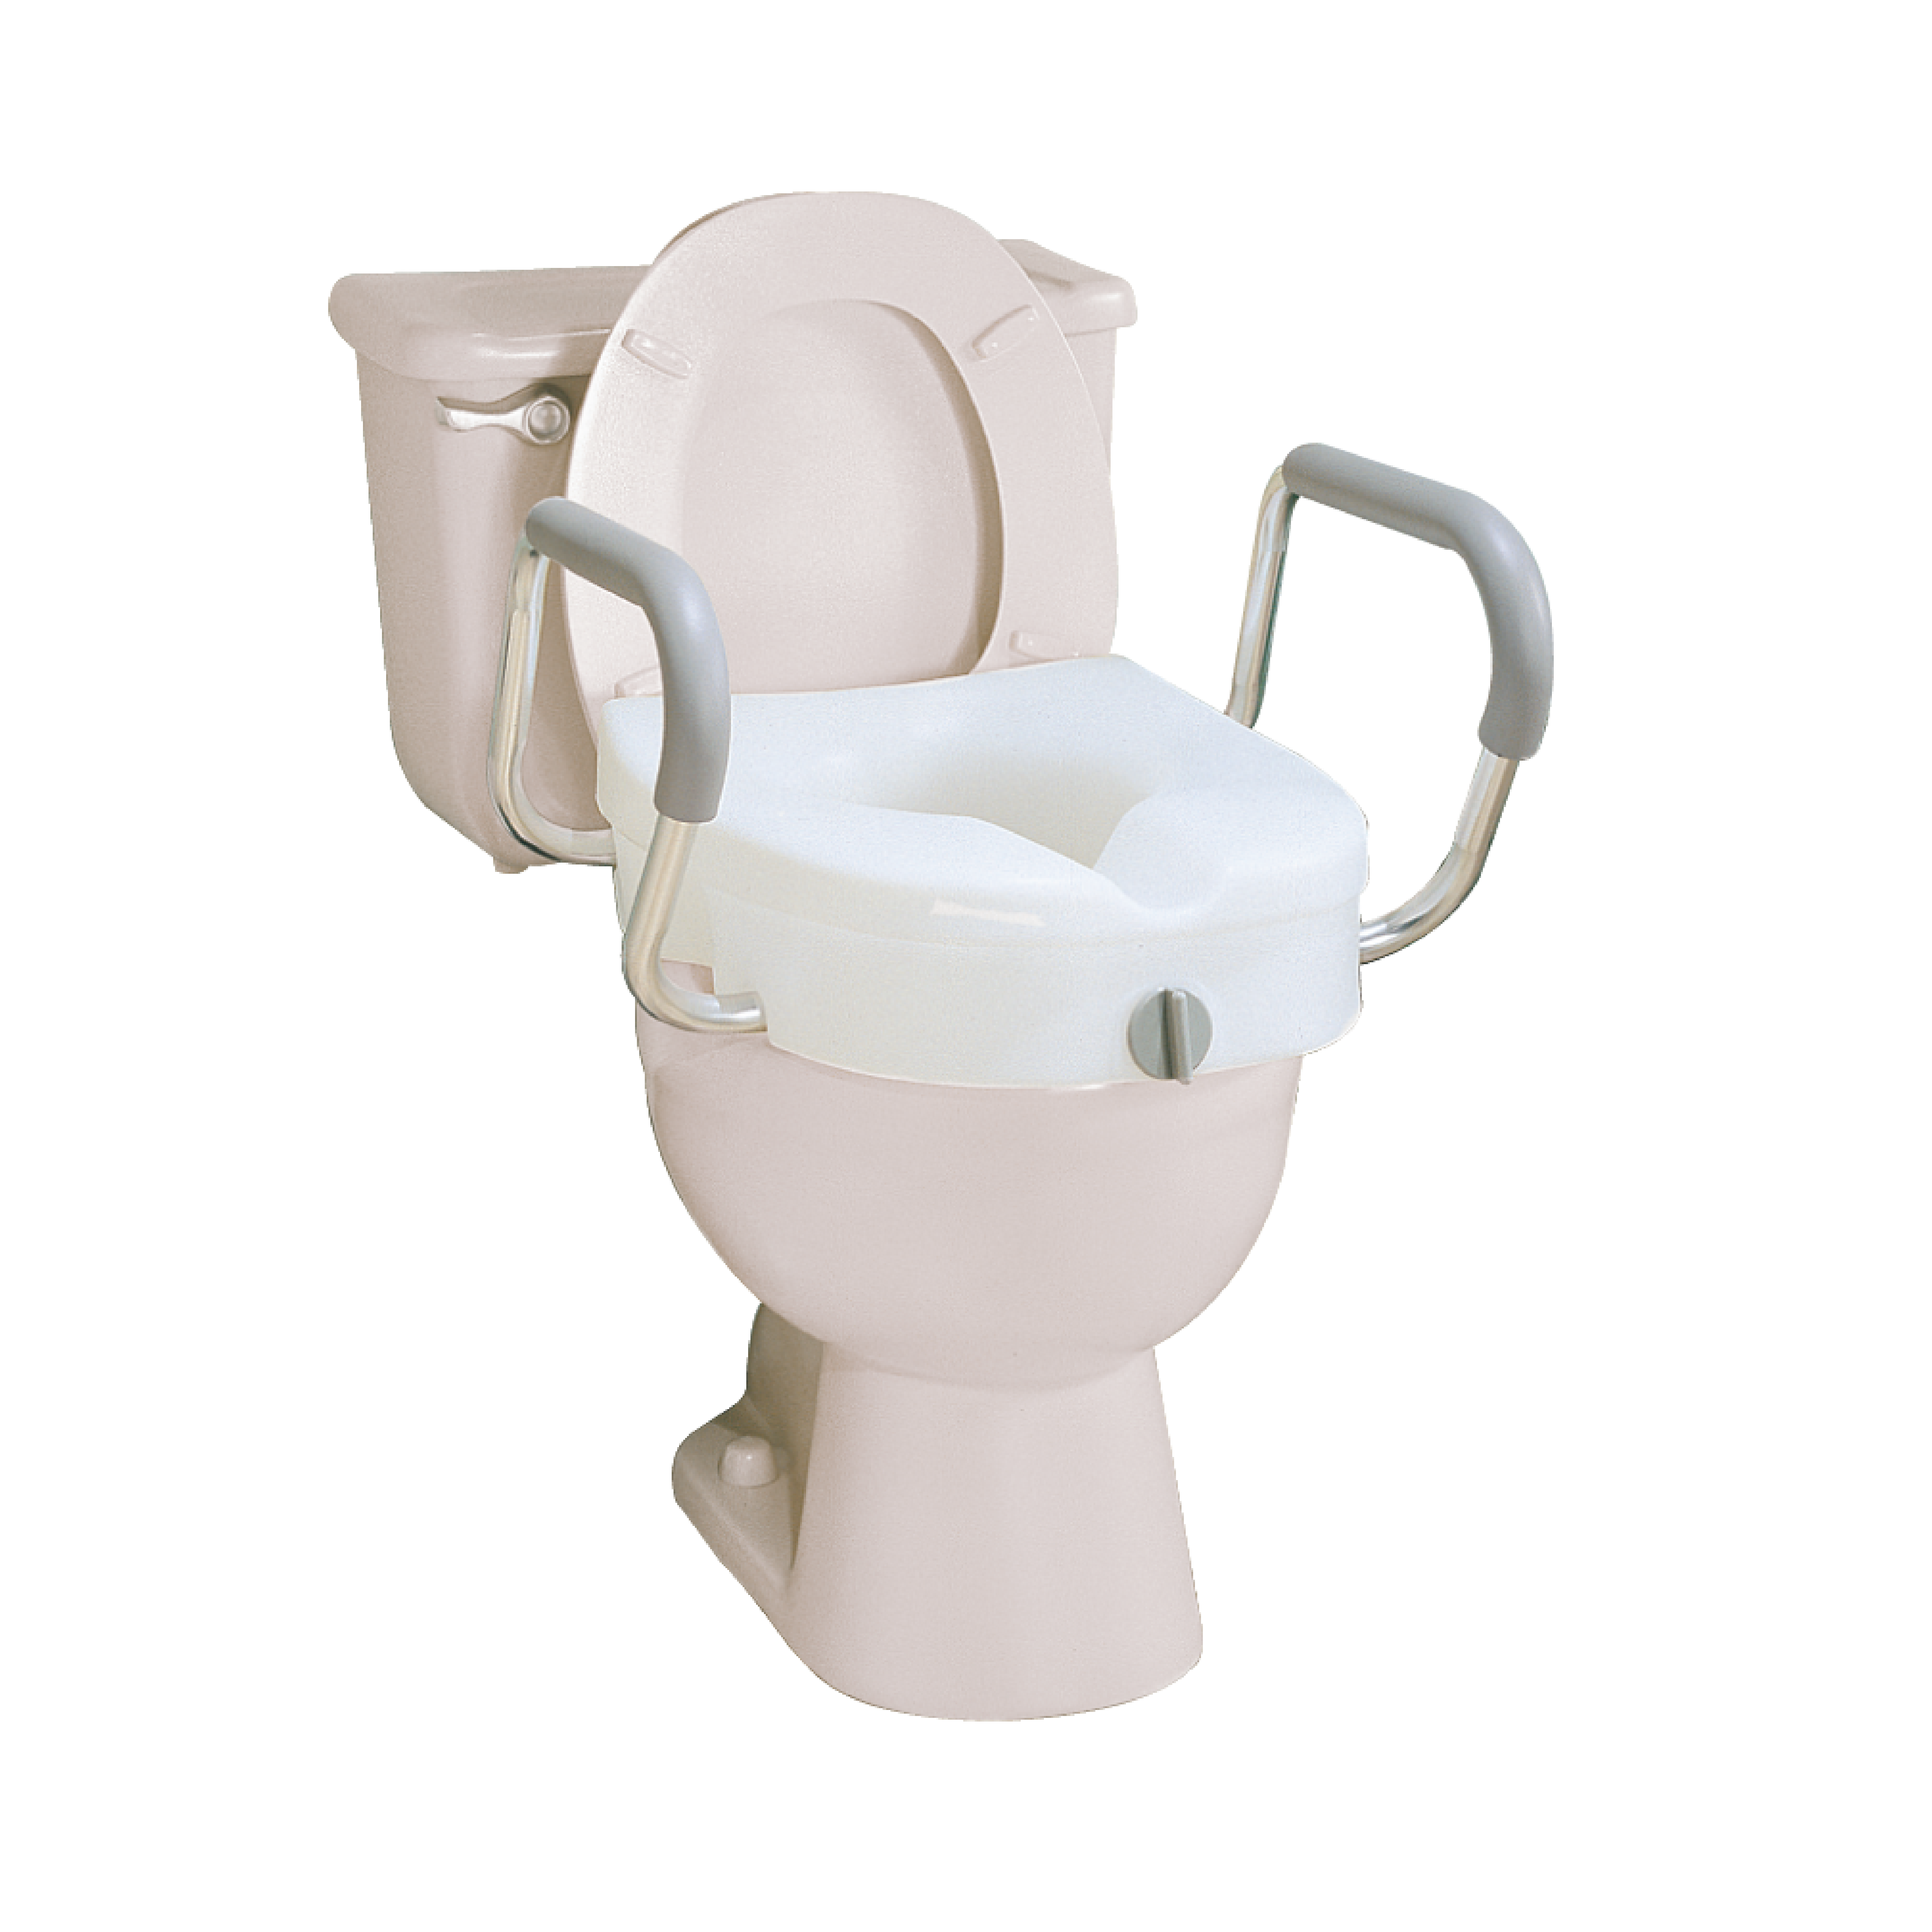 Carex Toilet Seat Riser, Elongated Raised Toilet Seat Adds 3.5 inches to  Toilet Height, for Assistance Bending or Sitting, 300 Pound Weight Capacity